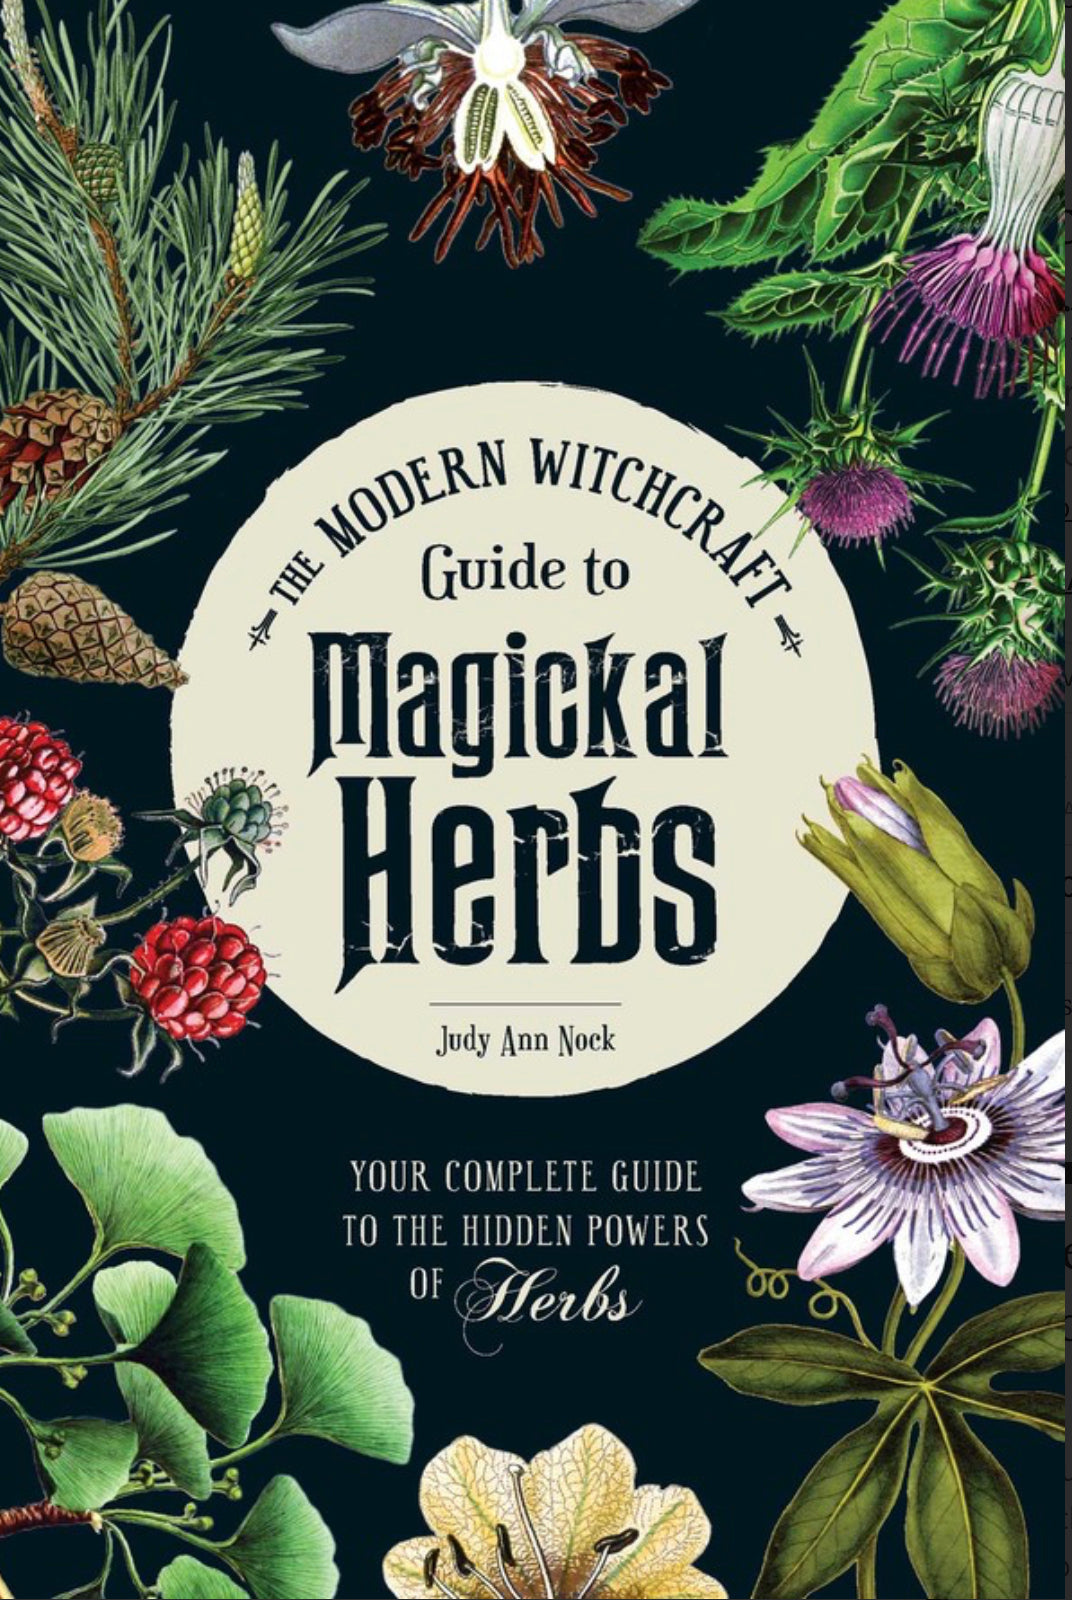 modern witchcraft guide to magickal herbs by Skye Alexander